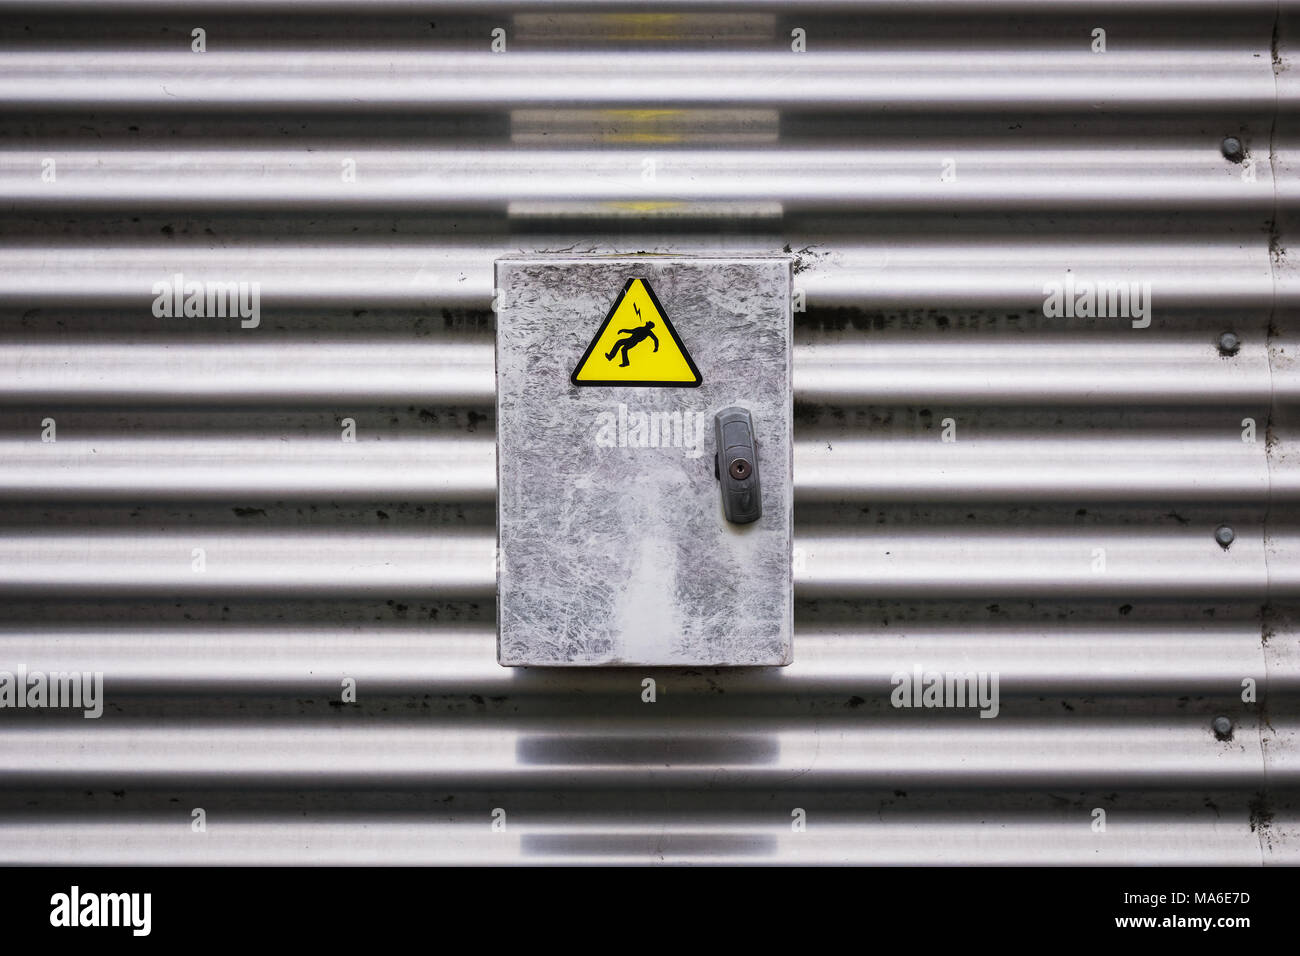 Closeup view of an electric box with a danger sign sticker representing an electrocuted person silhouette. Stock Photo